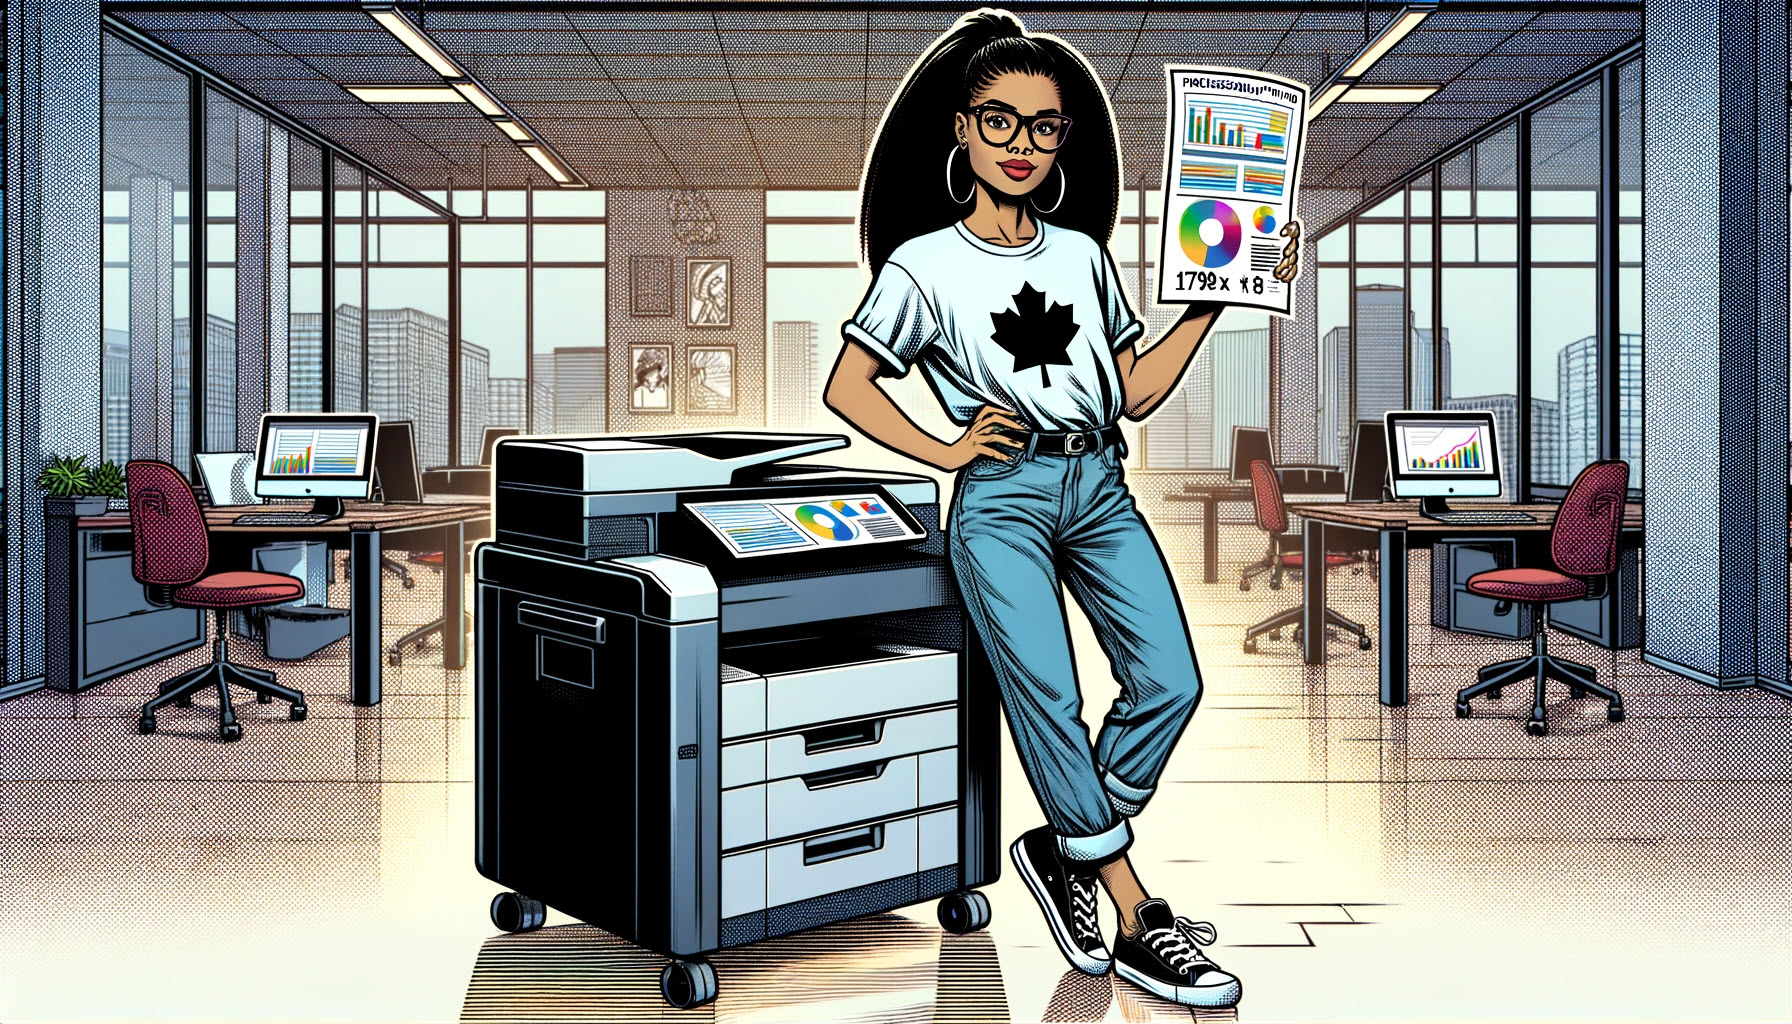 depicts a Black female dressed casually in a t-shirt, jeans, and sneakers, with her hair in a ponytail and wearing reading glasses. She stands next to a printer in a modern office setting, holding a printed report with a chart on it.